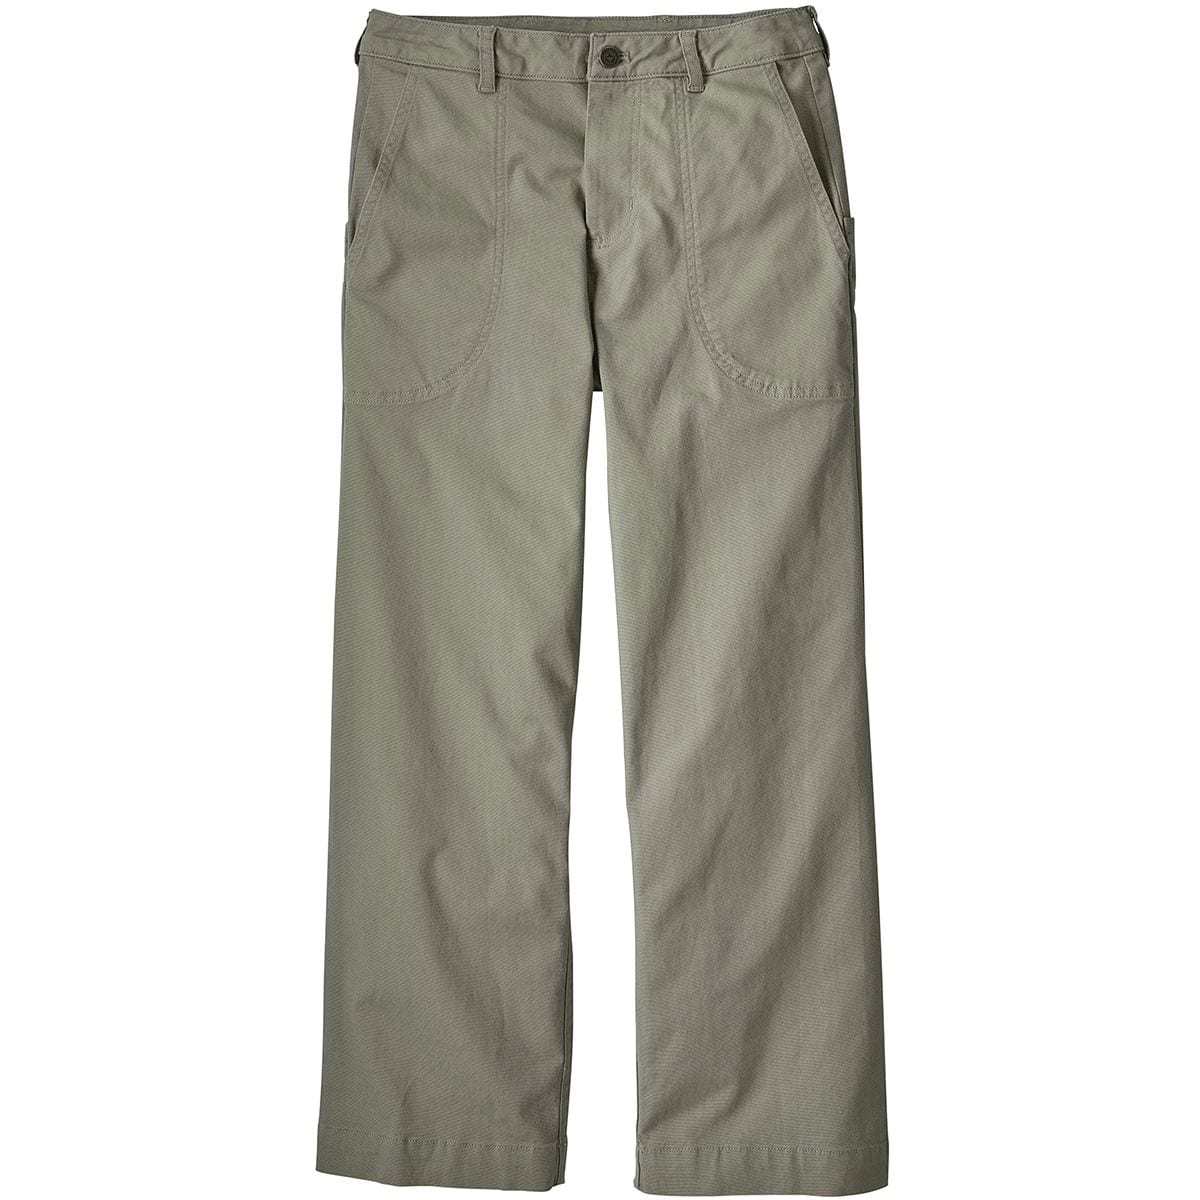 Patagonia Stand Up Cropped Pants - Women's - Women